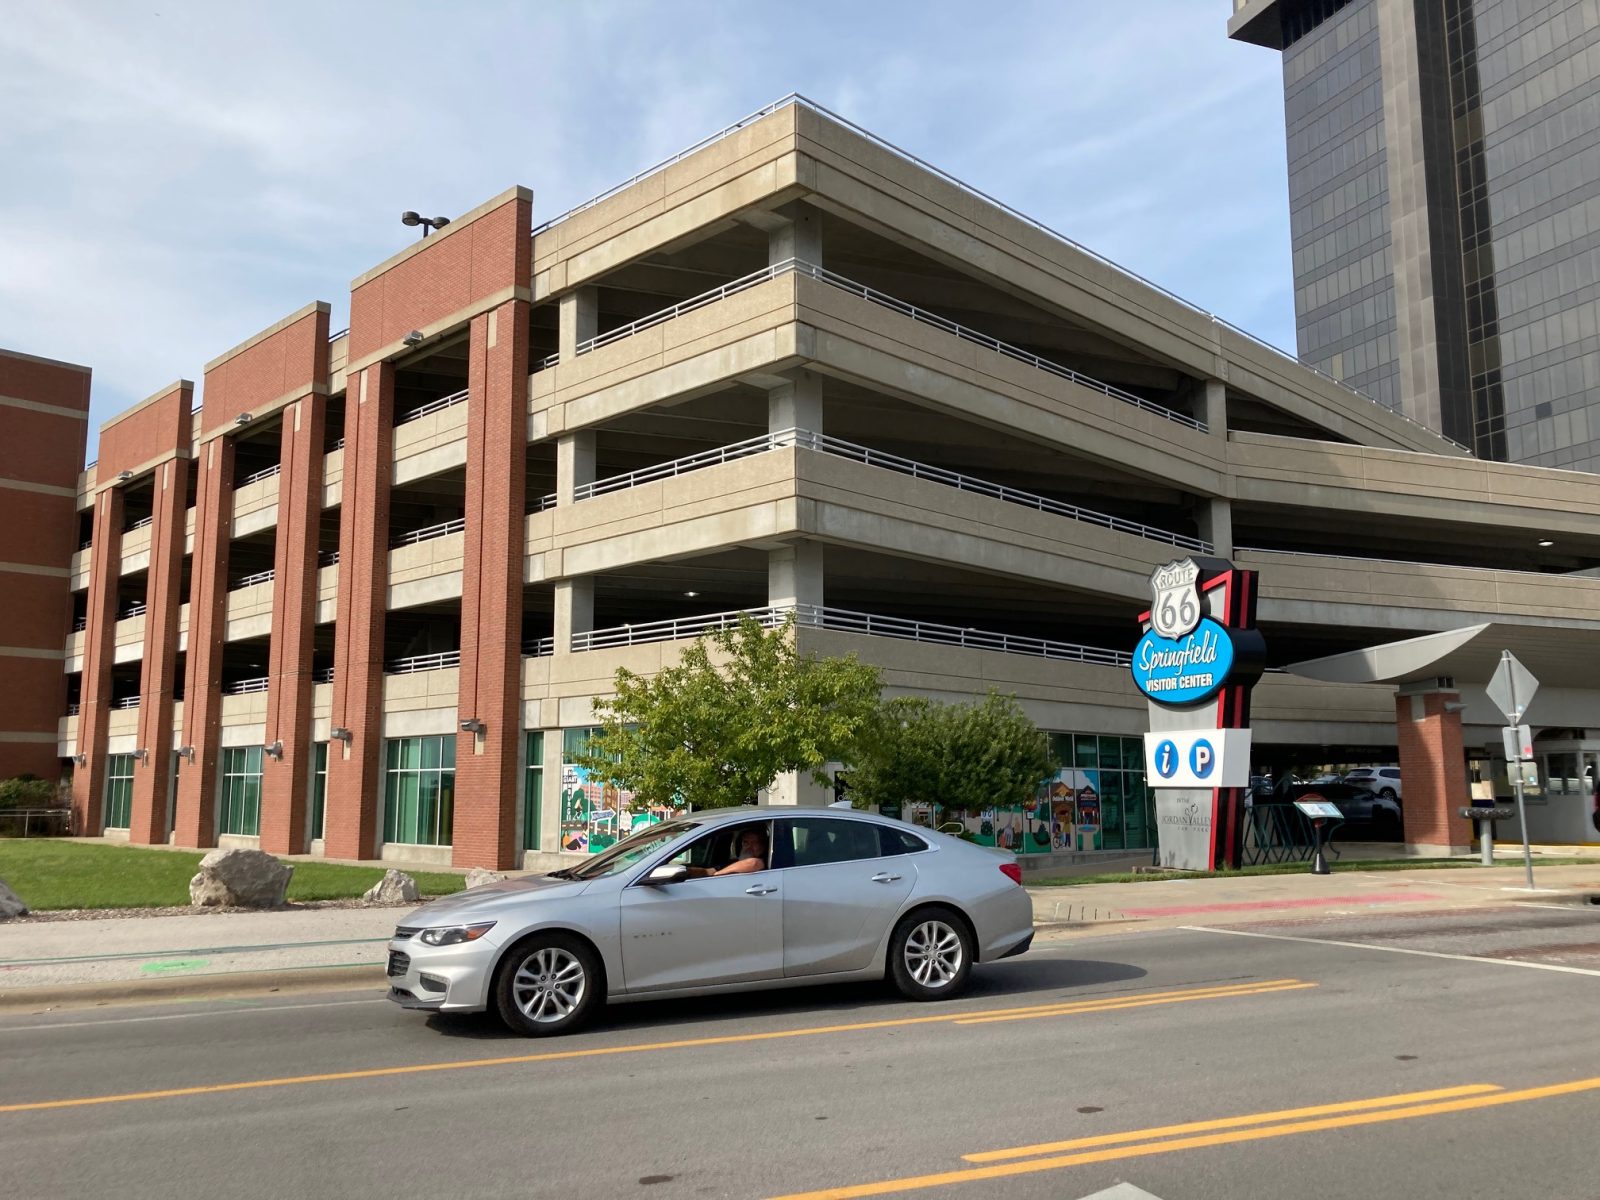 This is the parking garage at 815 E. St. Louis St. in downtown Springfield